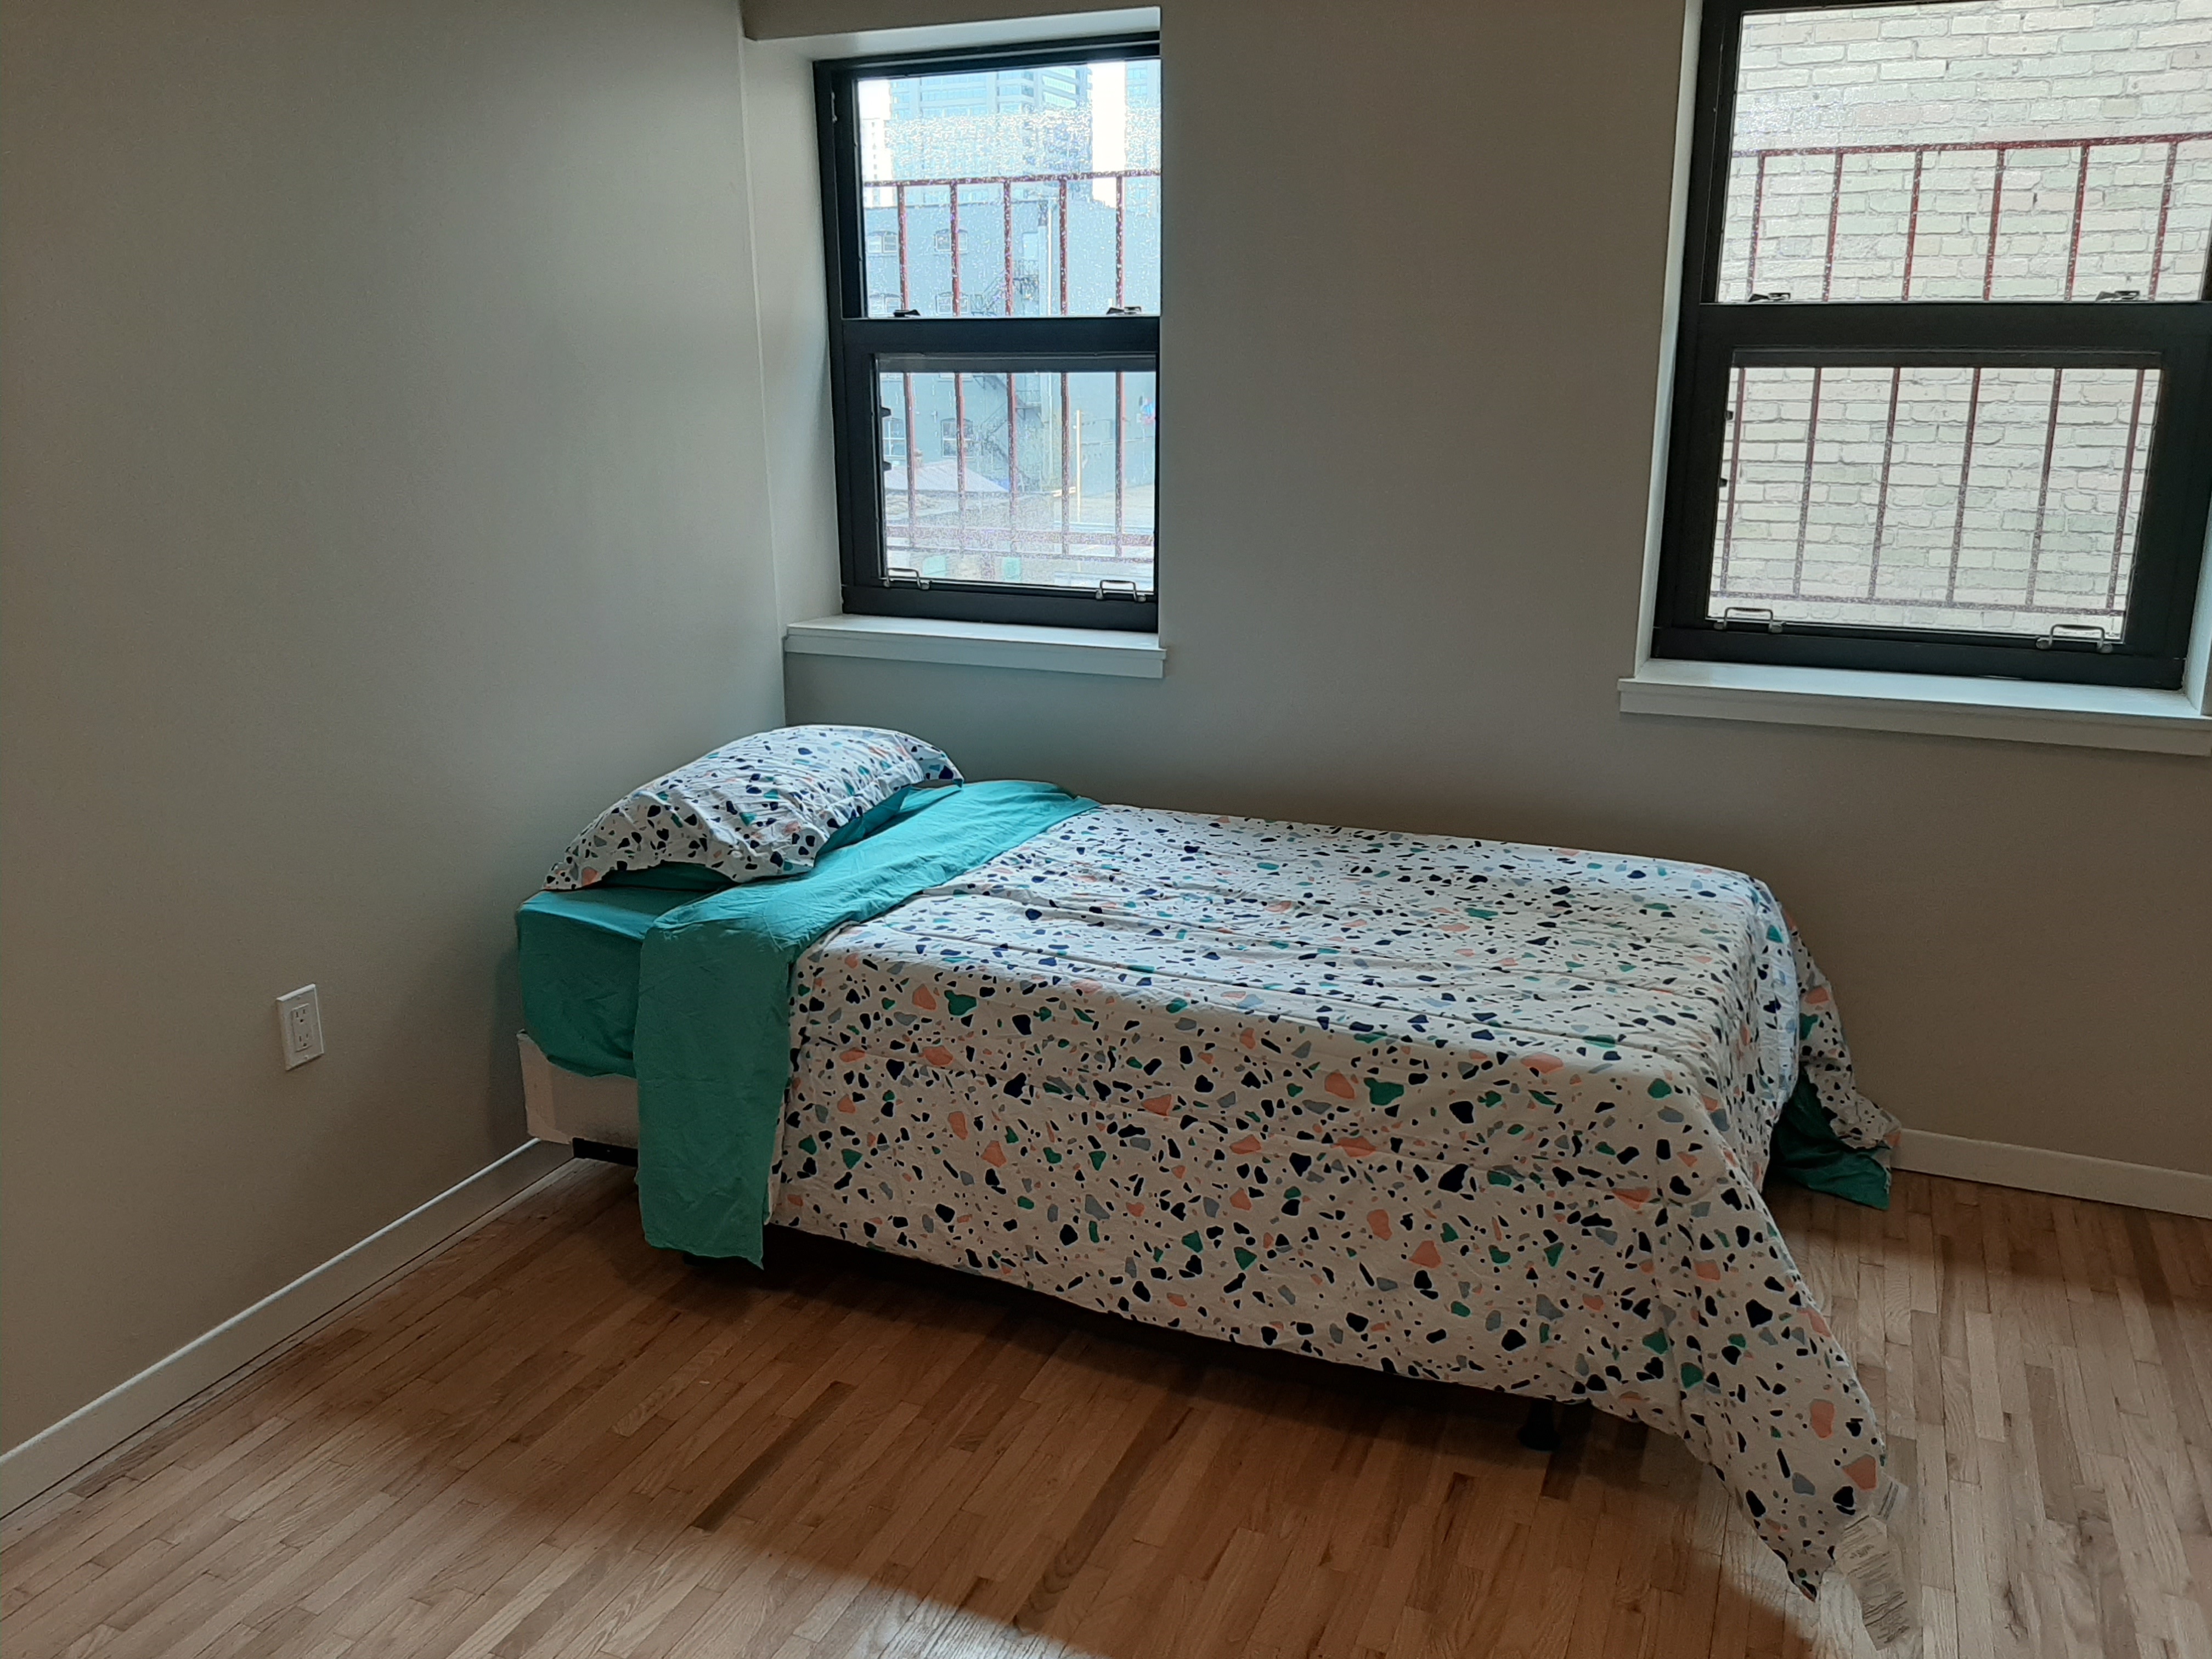 Another safe bed with natural light at 340 Richmond St. 